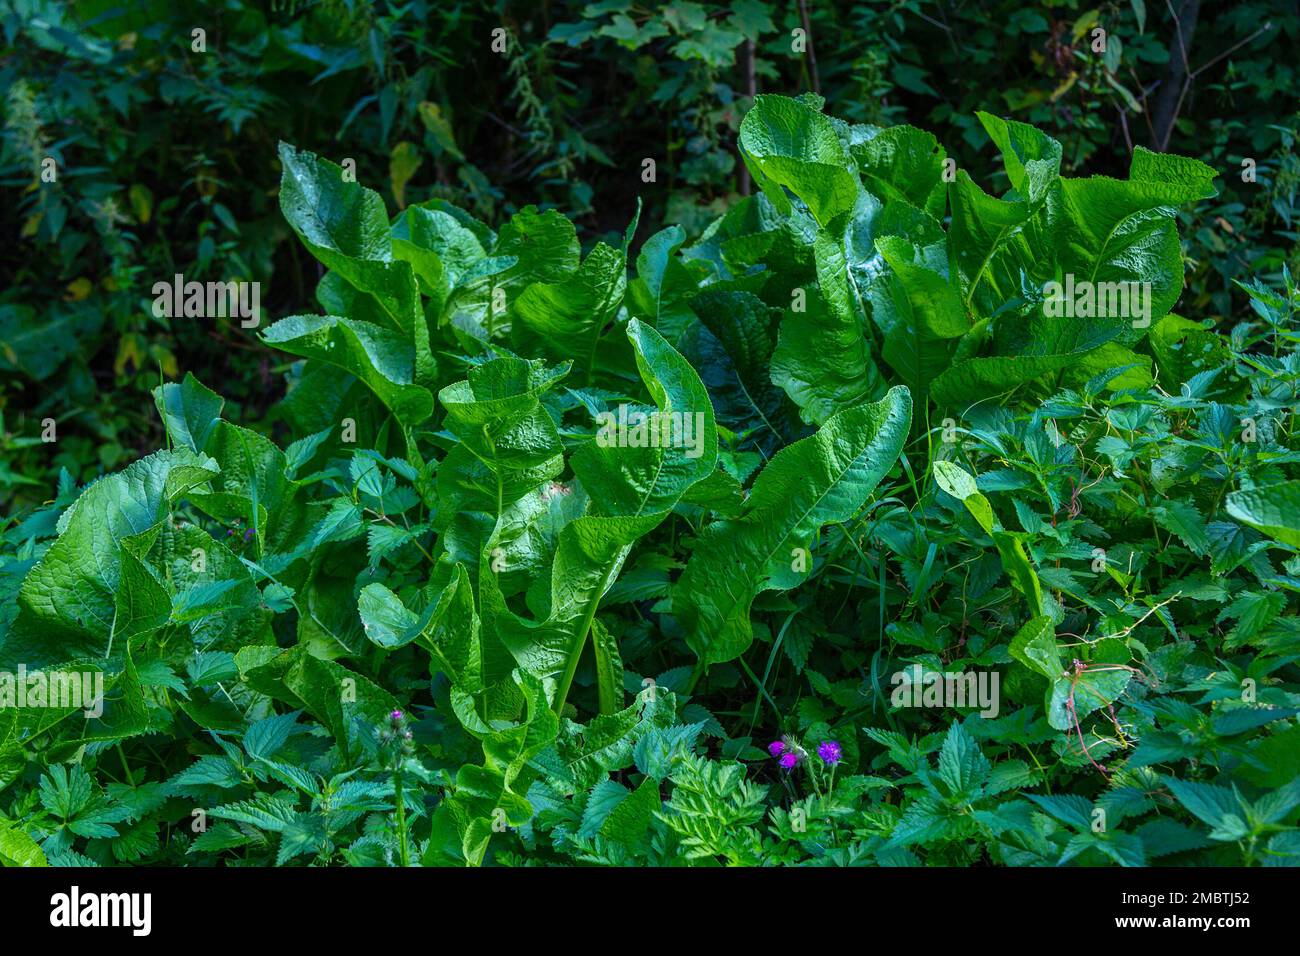 View of green wild horseradish leaves growing in the forest. Edible plant used as a spice or condiment. Stock Photo